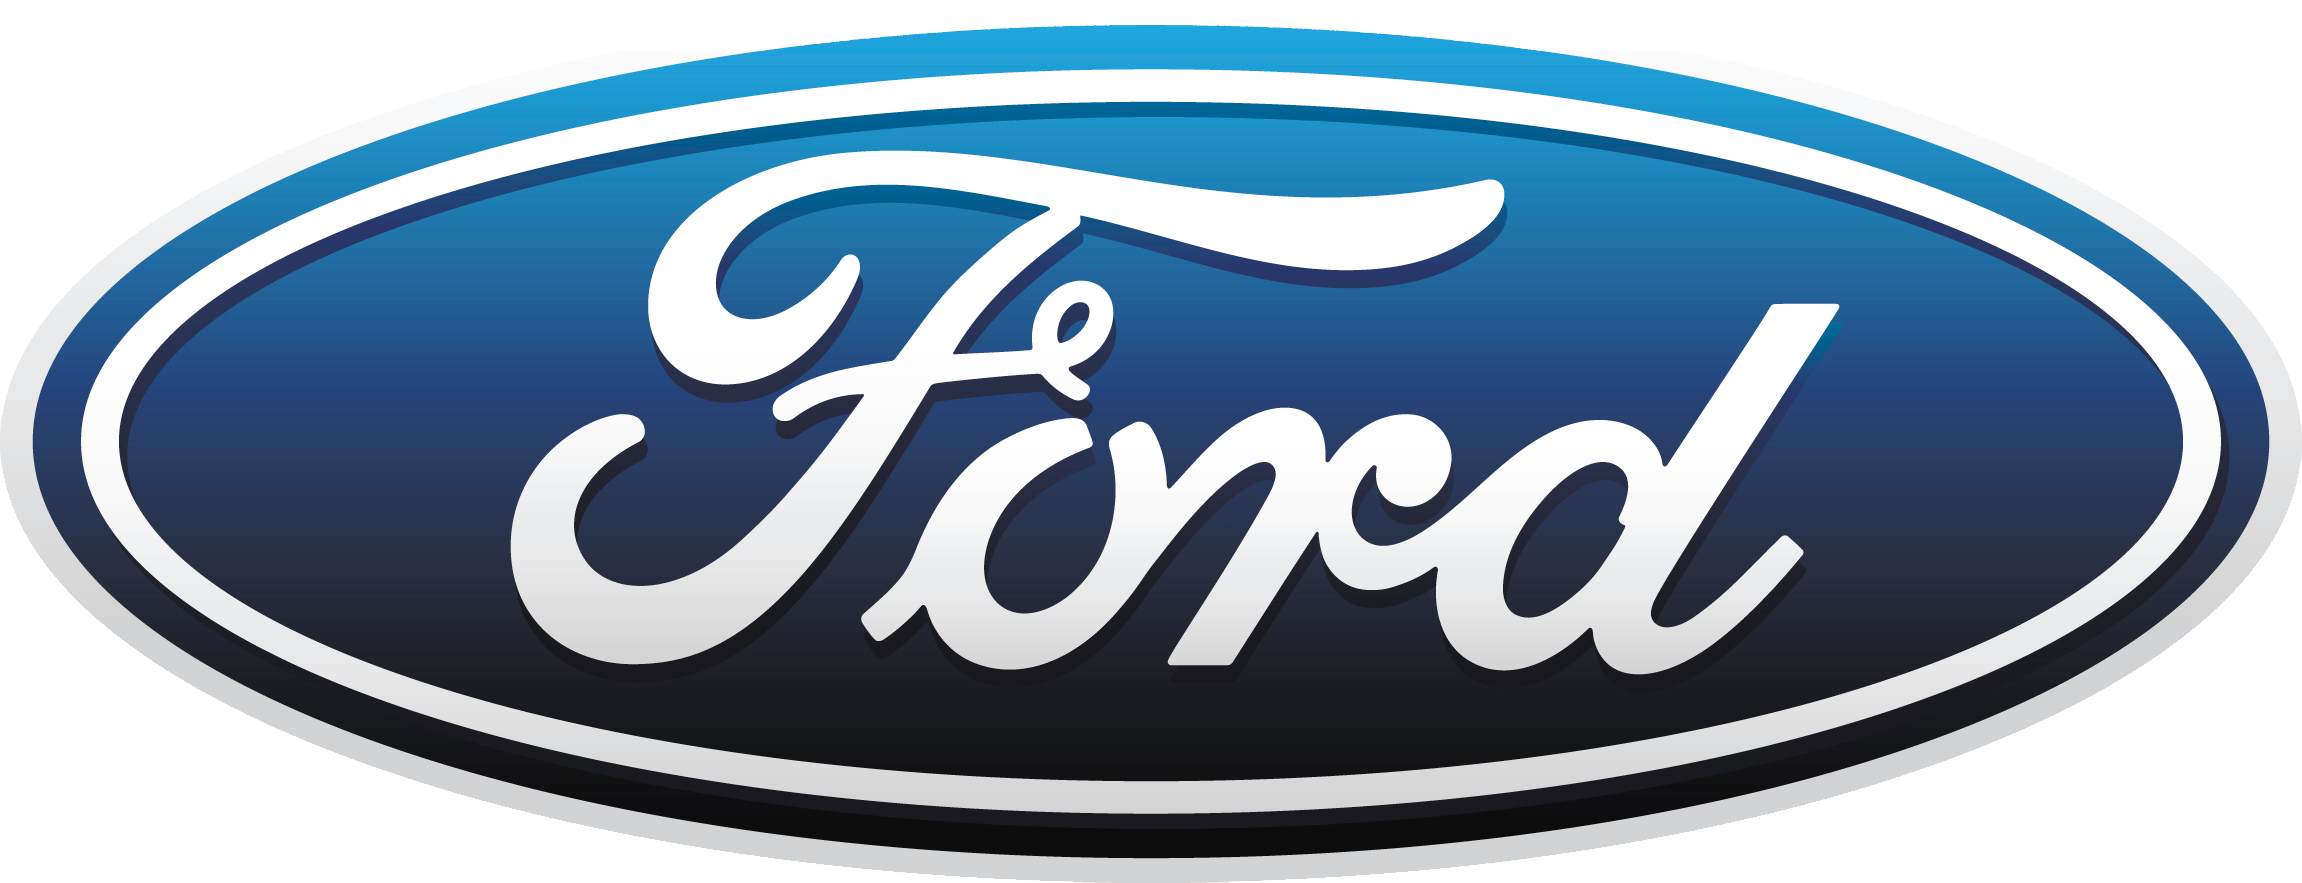 ford cars logo brands png images #2310